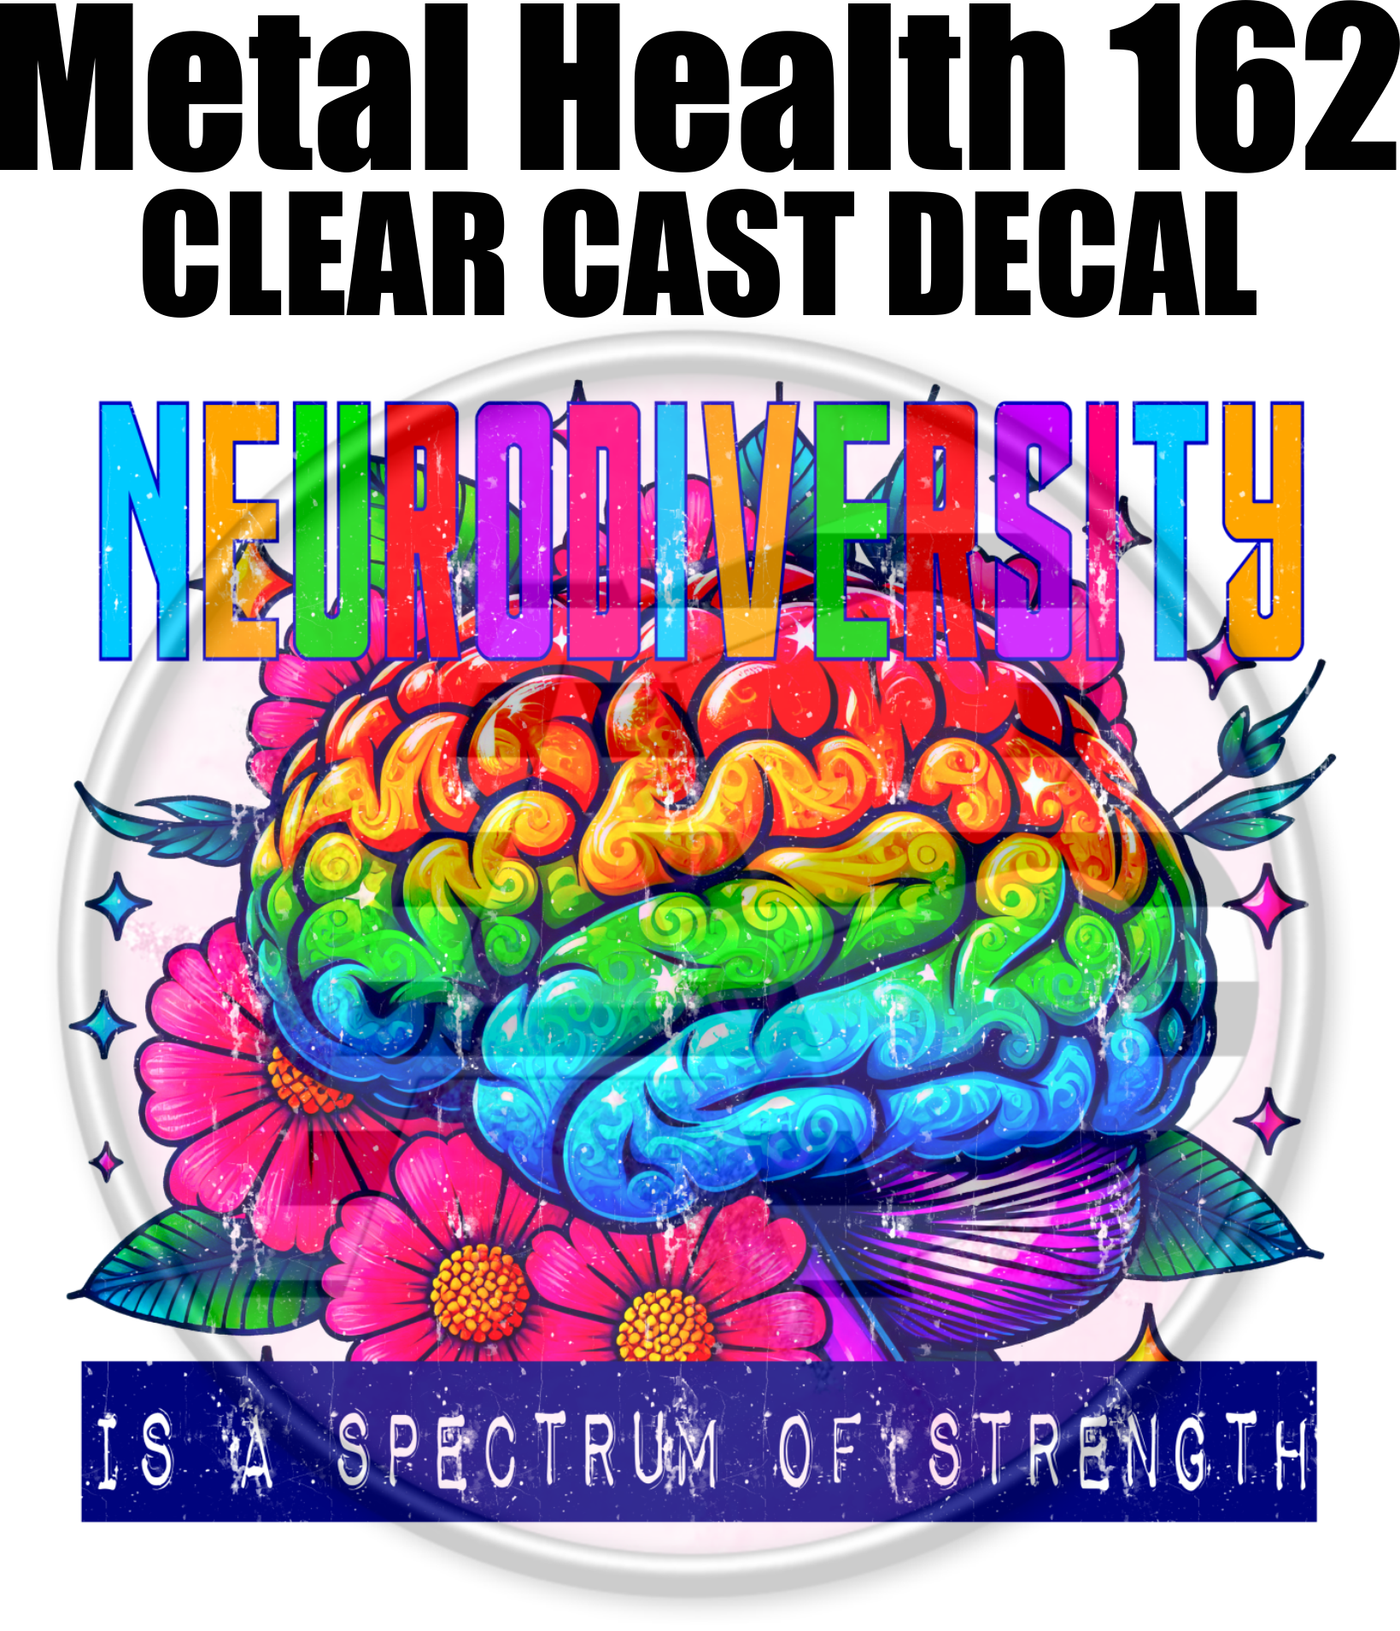 Mental Health 162 - Clear Cast Decal-631